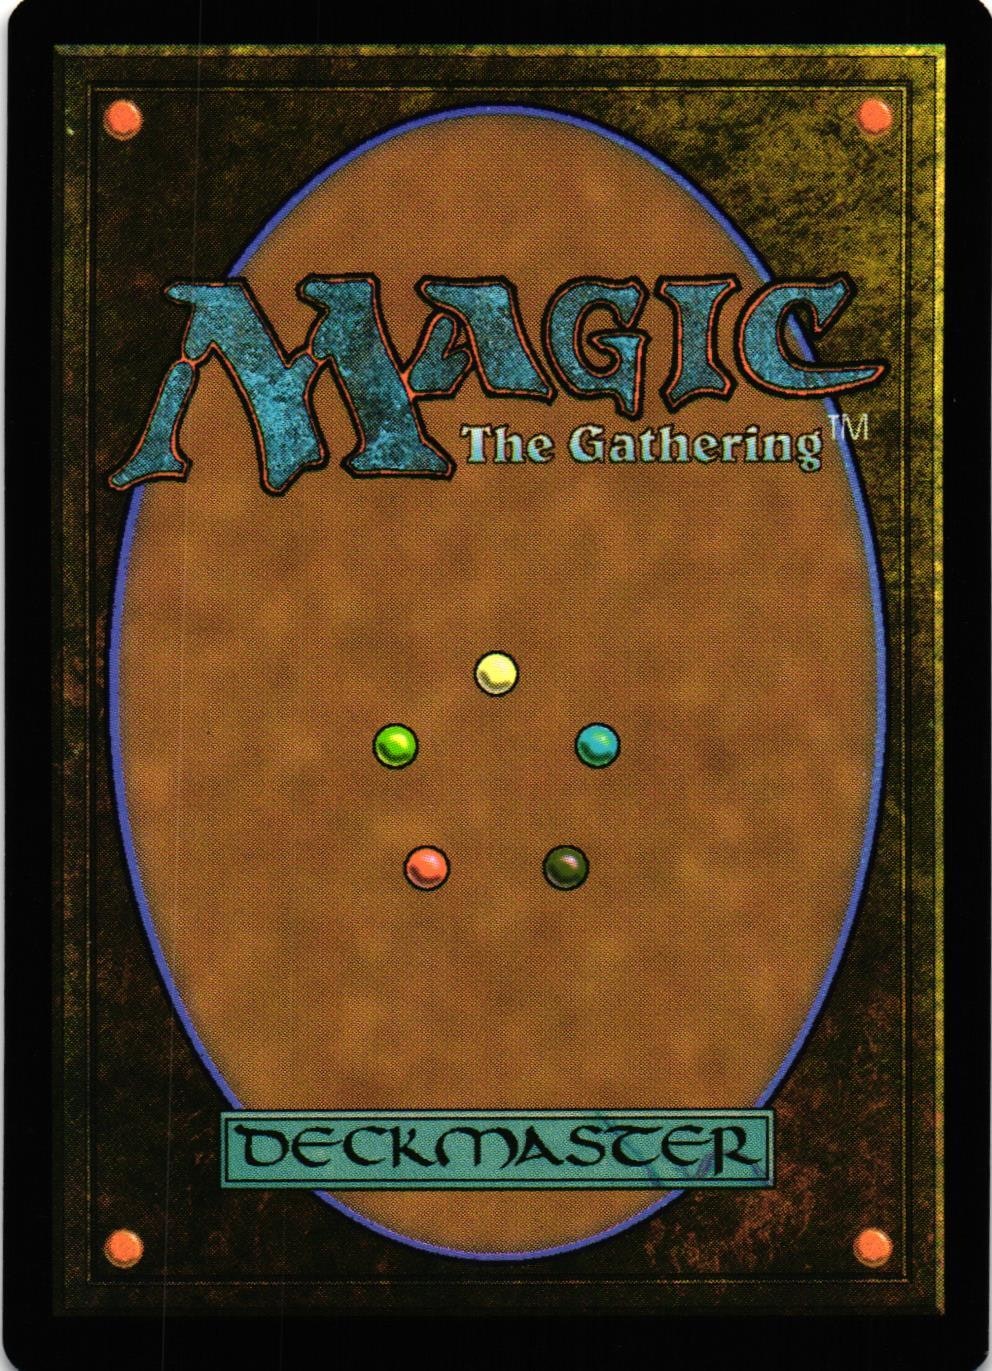 Talas Lookout Common 068/281 Dominaria United (DMU) Magic the Gathering